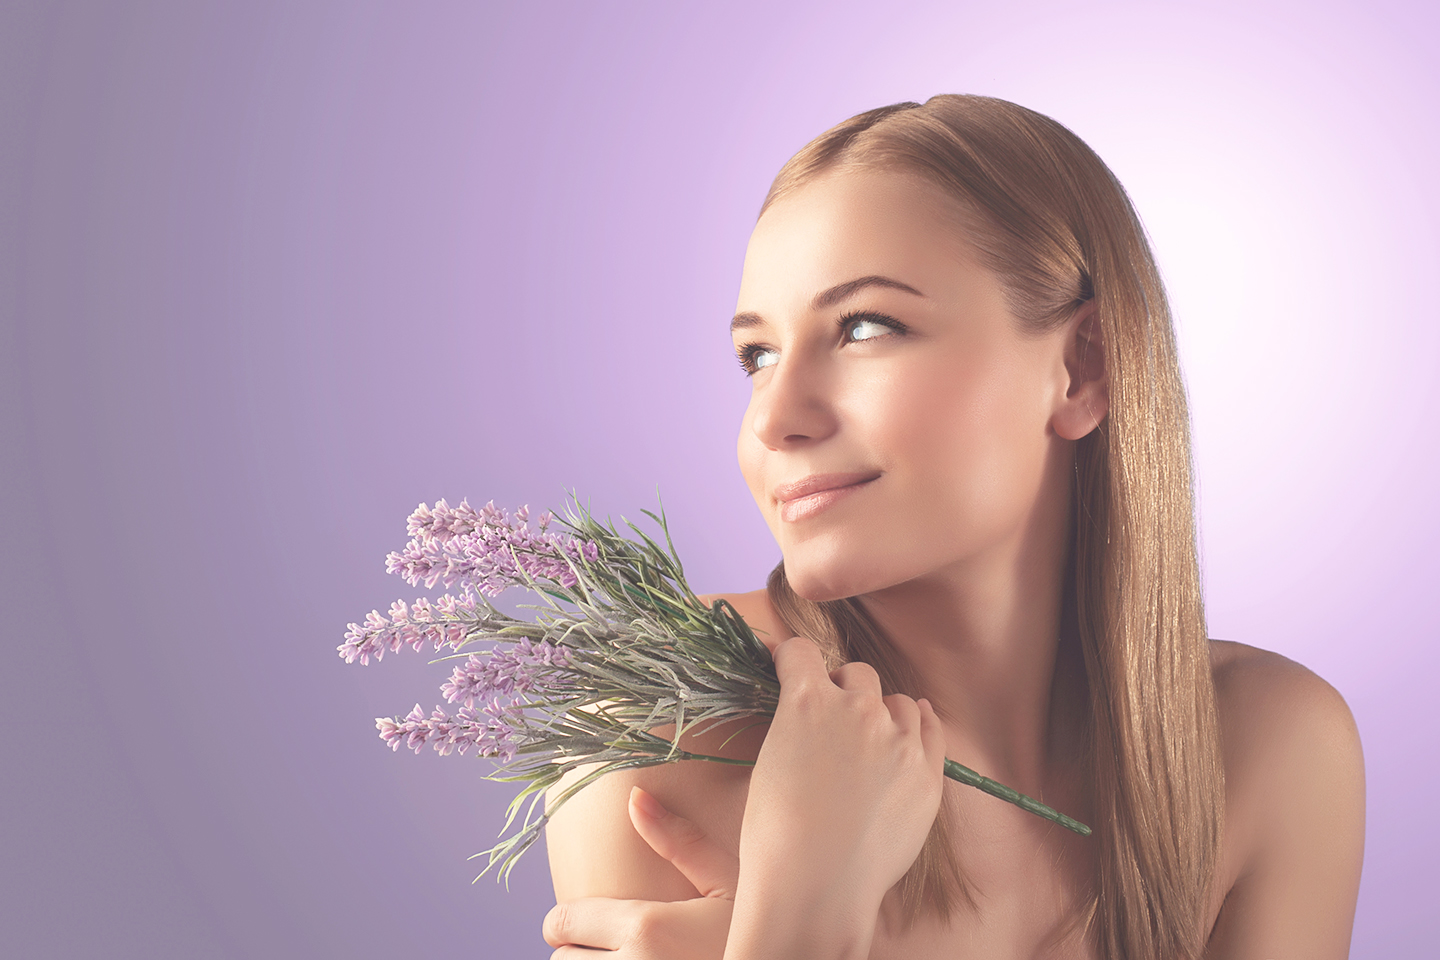 Learn more about the powerful benefits of aromatherapy.